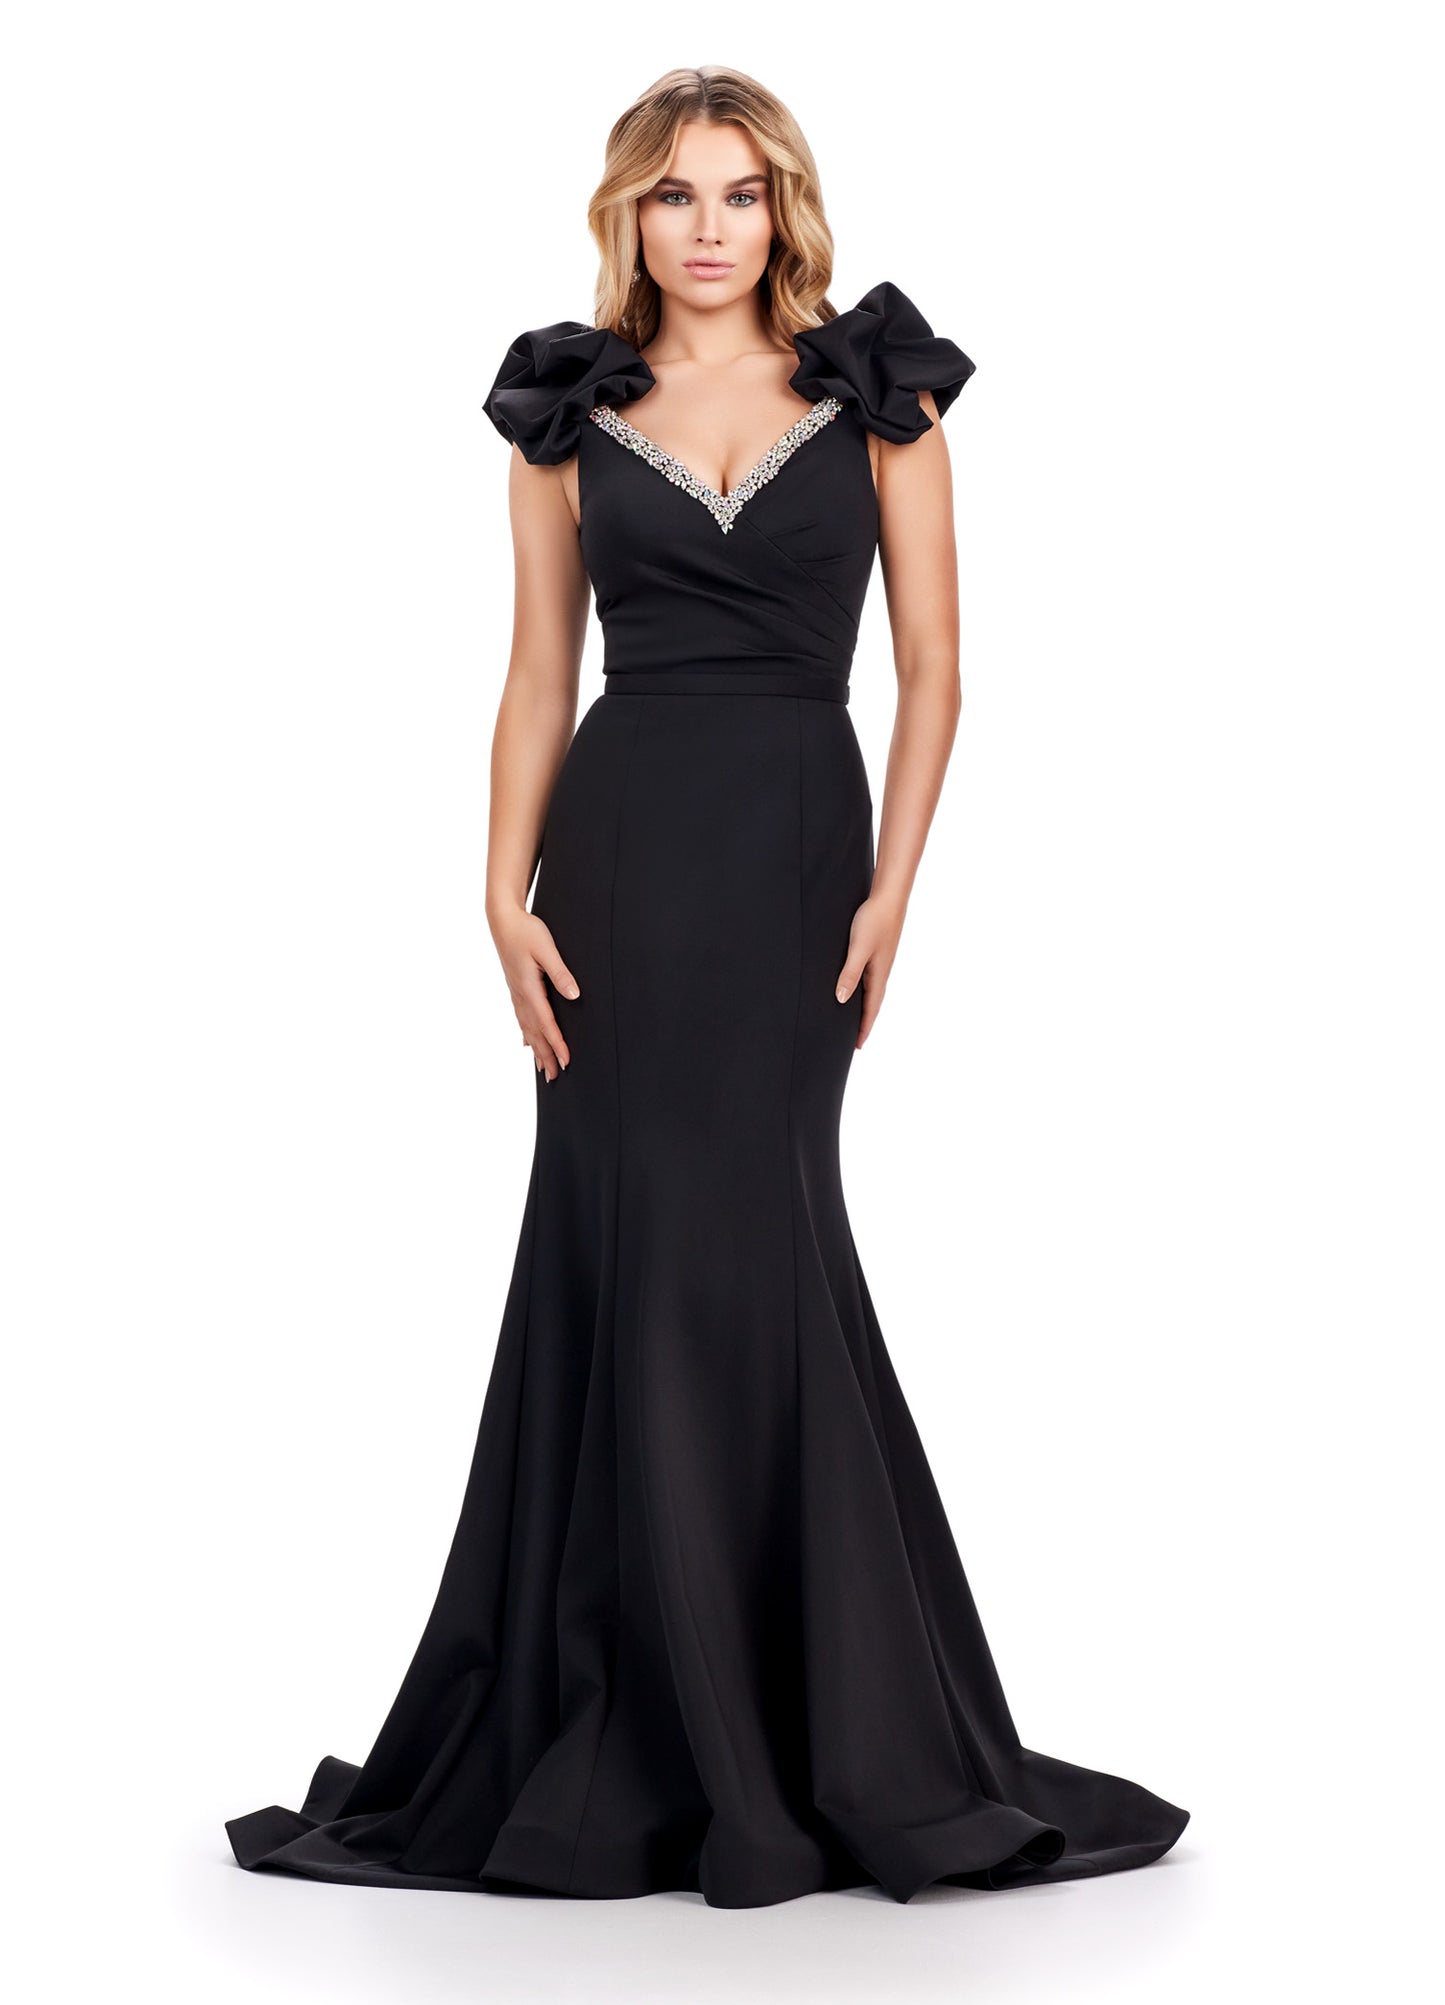 Ashley Lauren 11615 Long Prom Dress A-Line Scuba Gown Beaded Belt Puff Sleeves V Neck Formal Pageant Gown